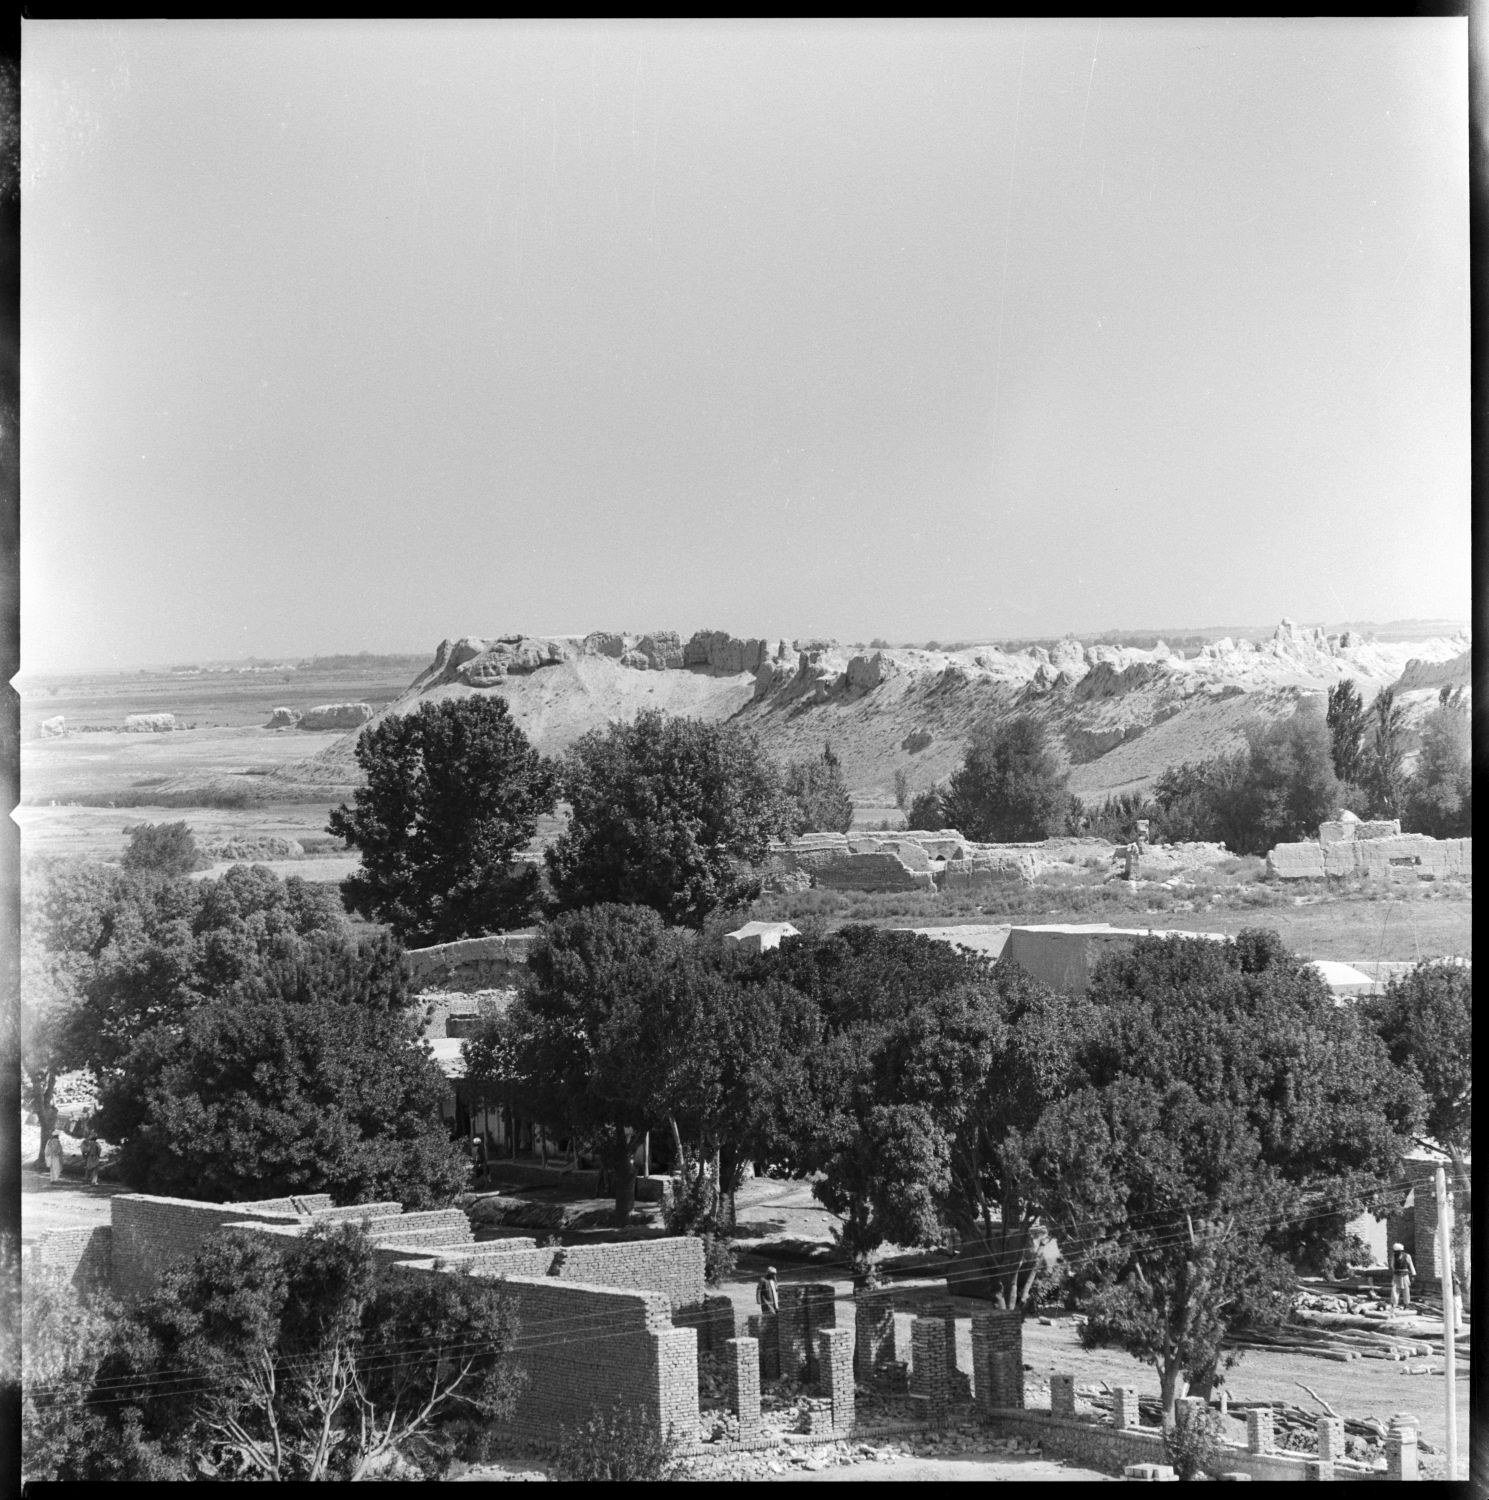 Distant view showing walls.